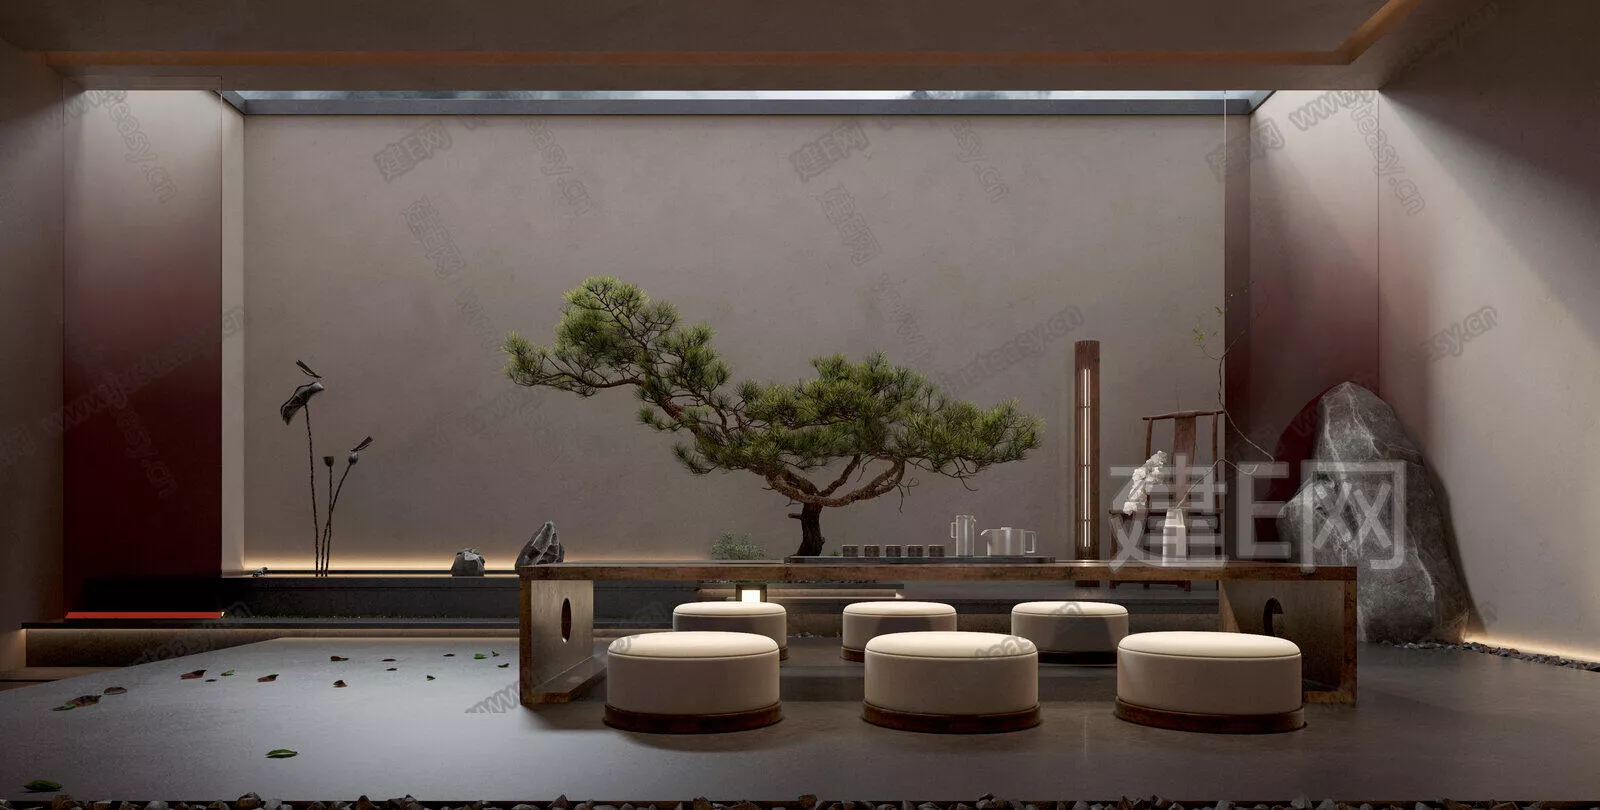 CHINESE TEAROOM - SKETCHUP 3D SCENE - ENSCAPE - 110118782